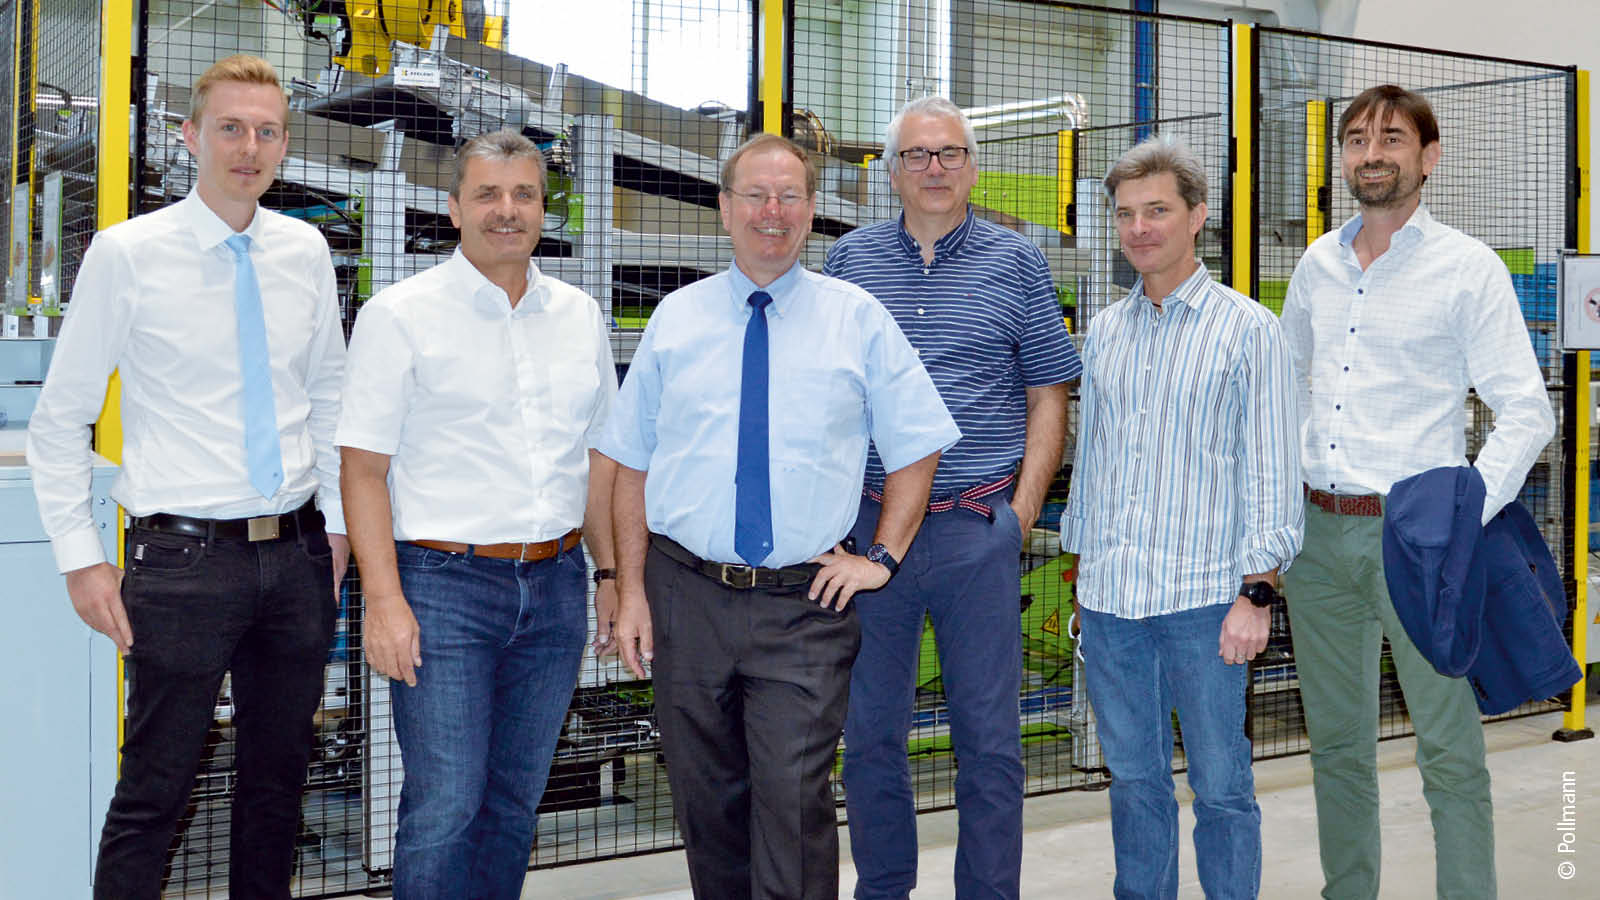 Delighted with the successful integration of mechanical and industrial engineering (from left to right): Rainer Hobiger (Head of Facility Management, Pollmann), Manfred Jäger (Head of Vitis Plant, Pollmann), Robert Pollmann (Managing Partner, Pollmann International), Thomas Führer (Head of Building Automation, Stiwa), Christian Pillwein (Industry Manager Building Automation, Beckhoff Austria), and Harald Setka (Architect, Peneder). 